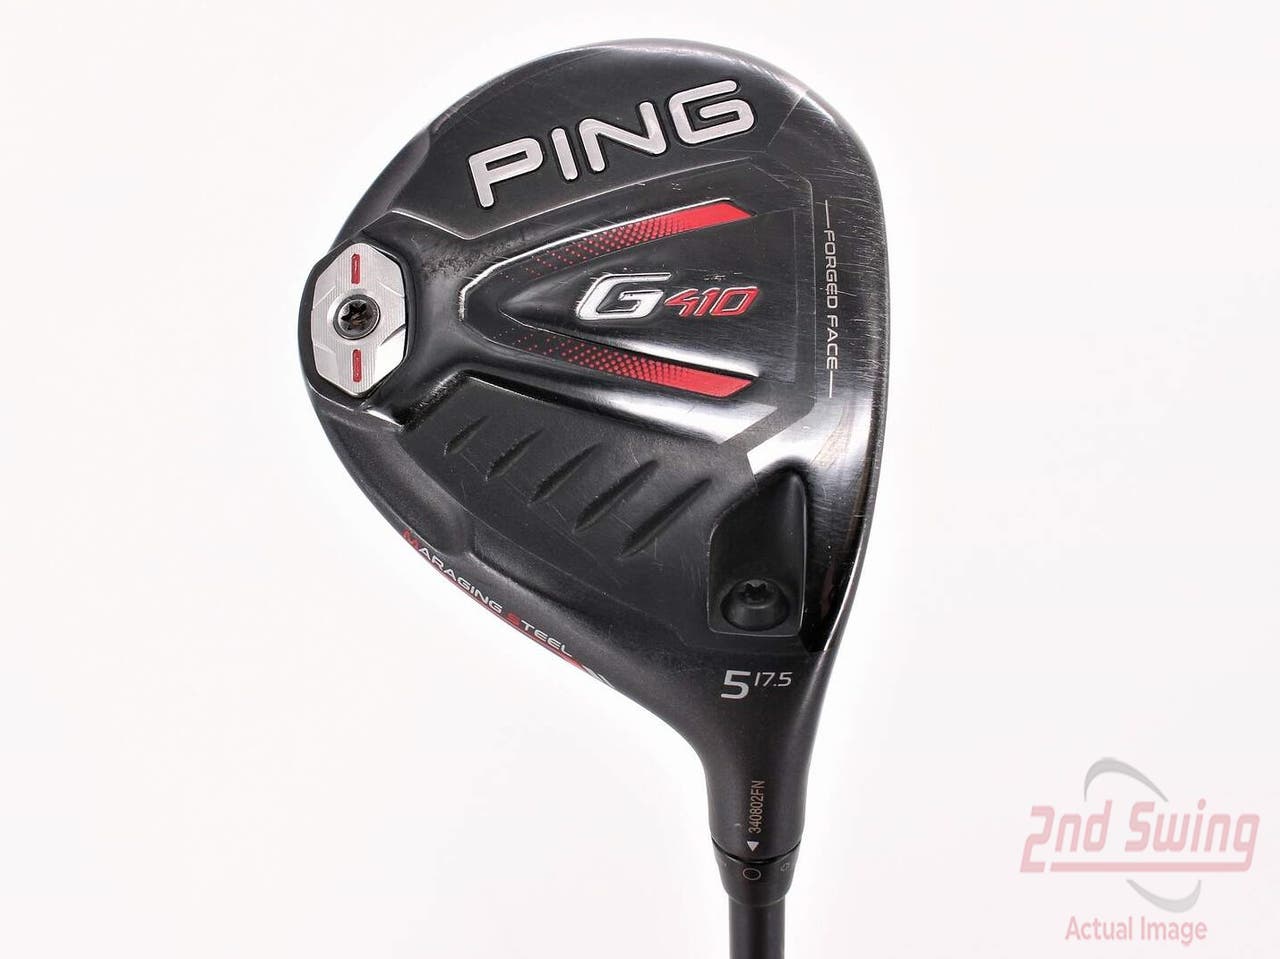 Ping G410 Fairway Wood 5 Wood 5W 17.5° ALTA CB 65 Red Graphite Stiff Right Handed 42.5in